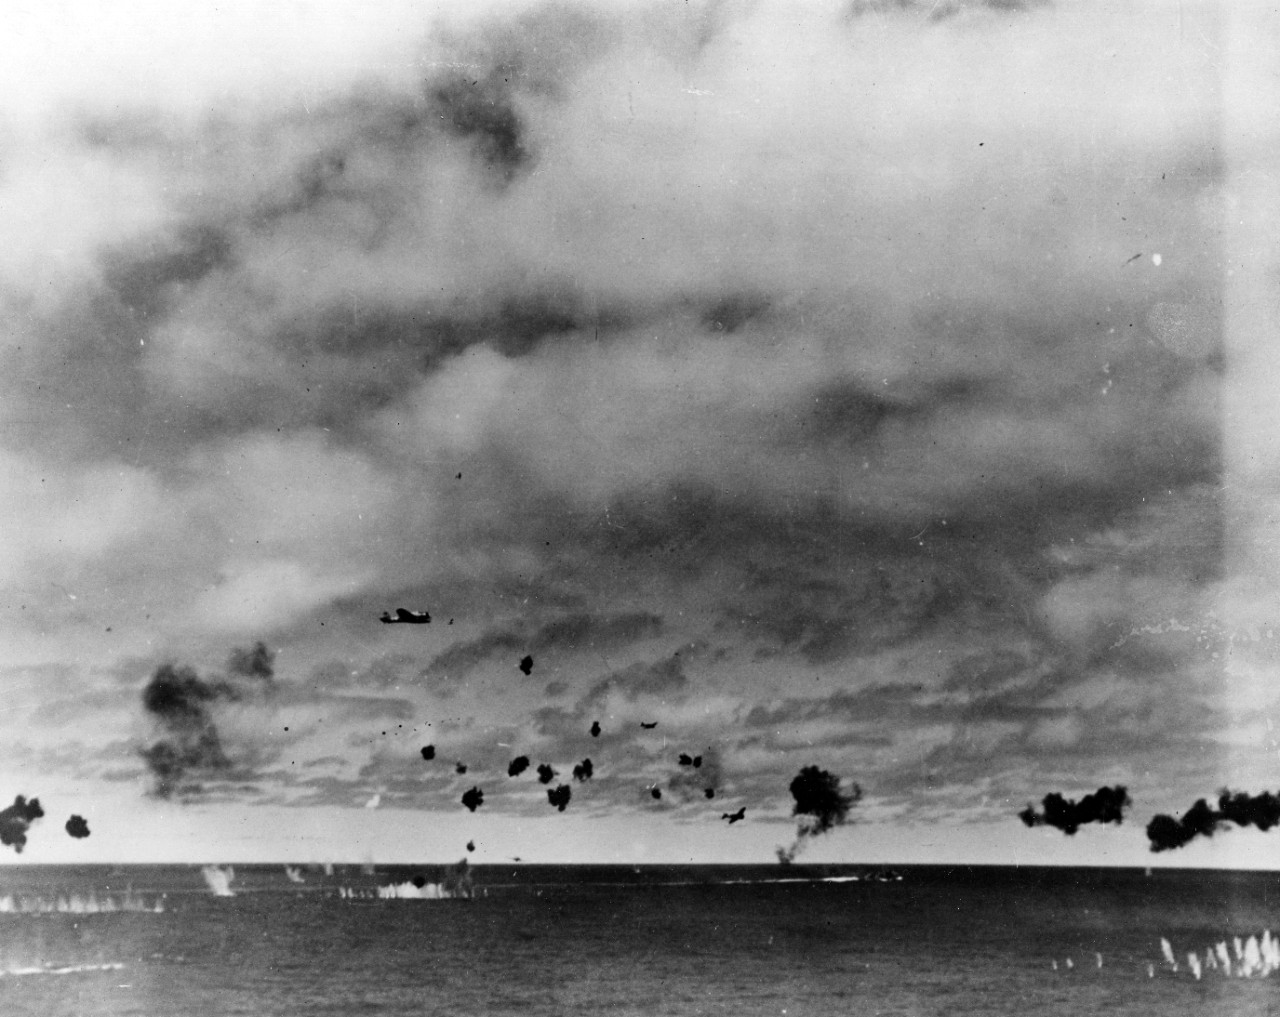 Photo #: 80-G-11639  Battle of Midway, June 1942